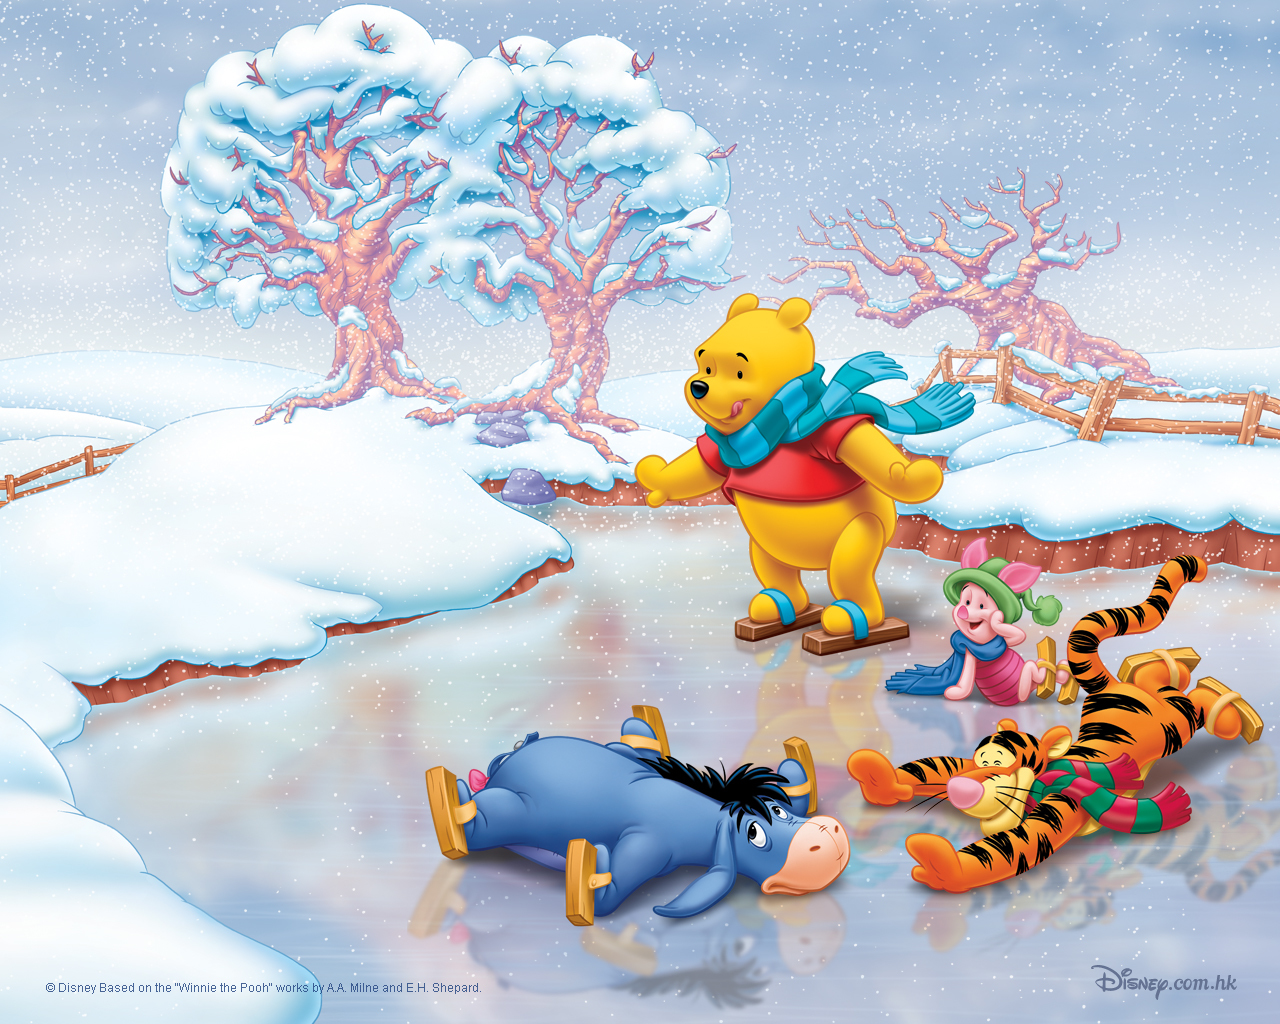 winnie the pooh, cartoon, pictures, winter, ice, snow